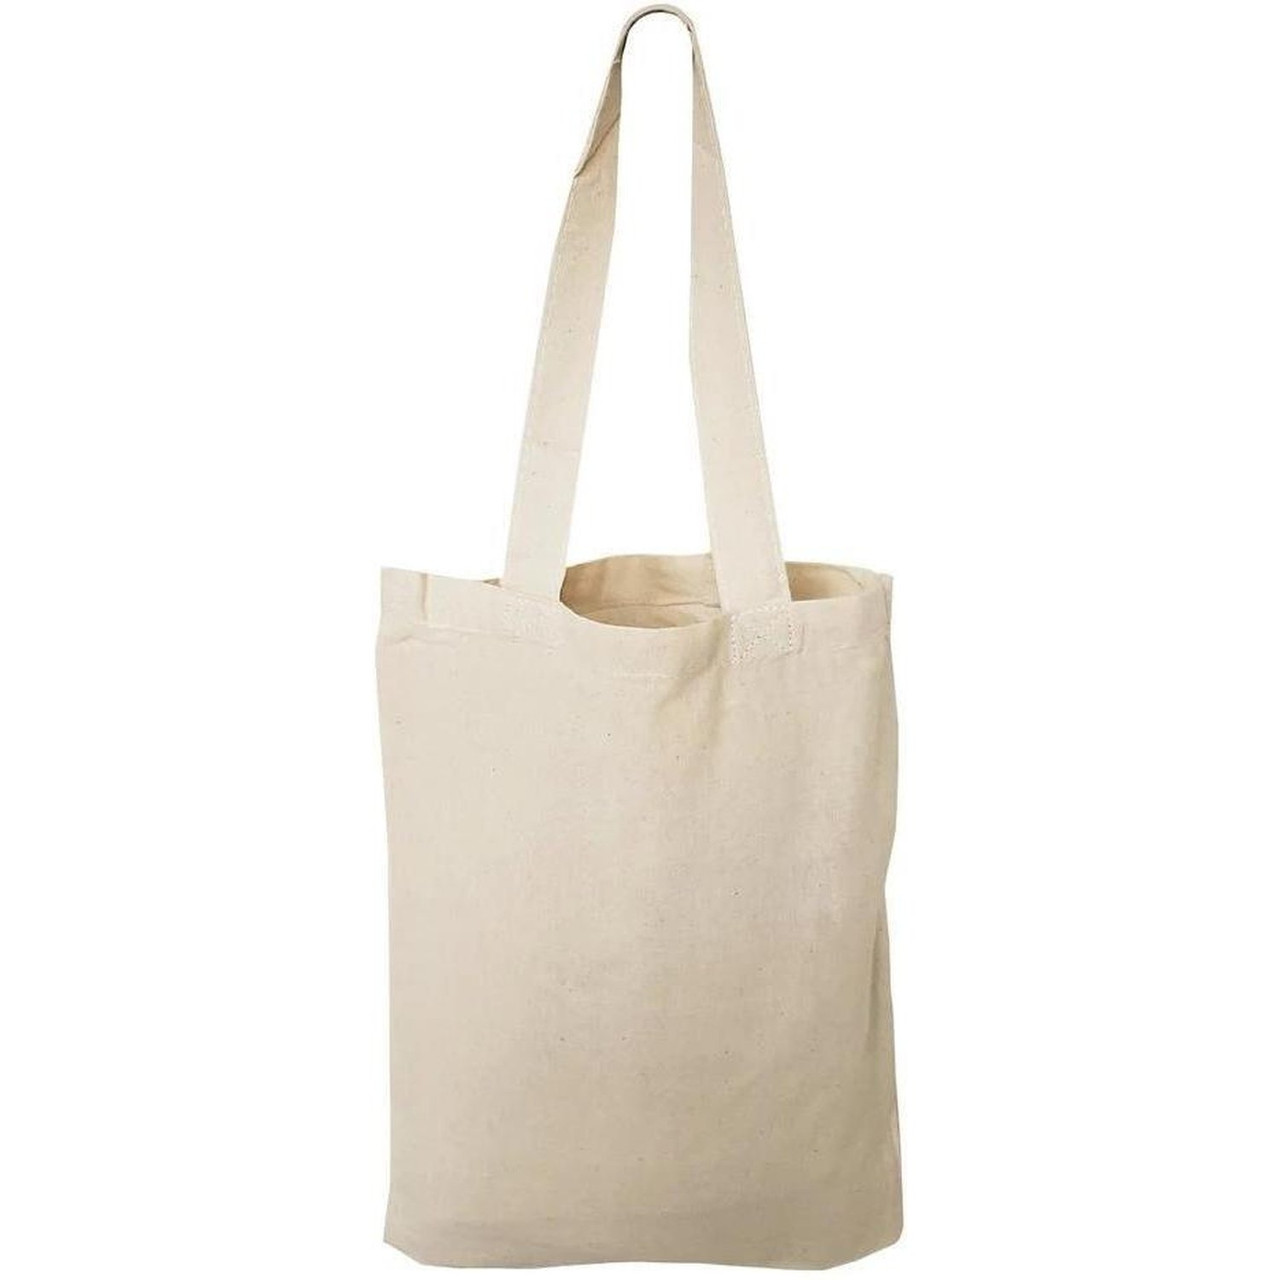 Medium White Plastic Carry Bags | Performance Packaging